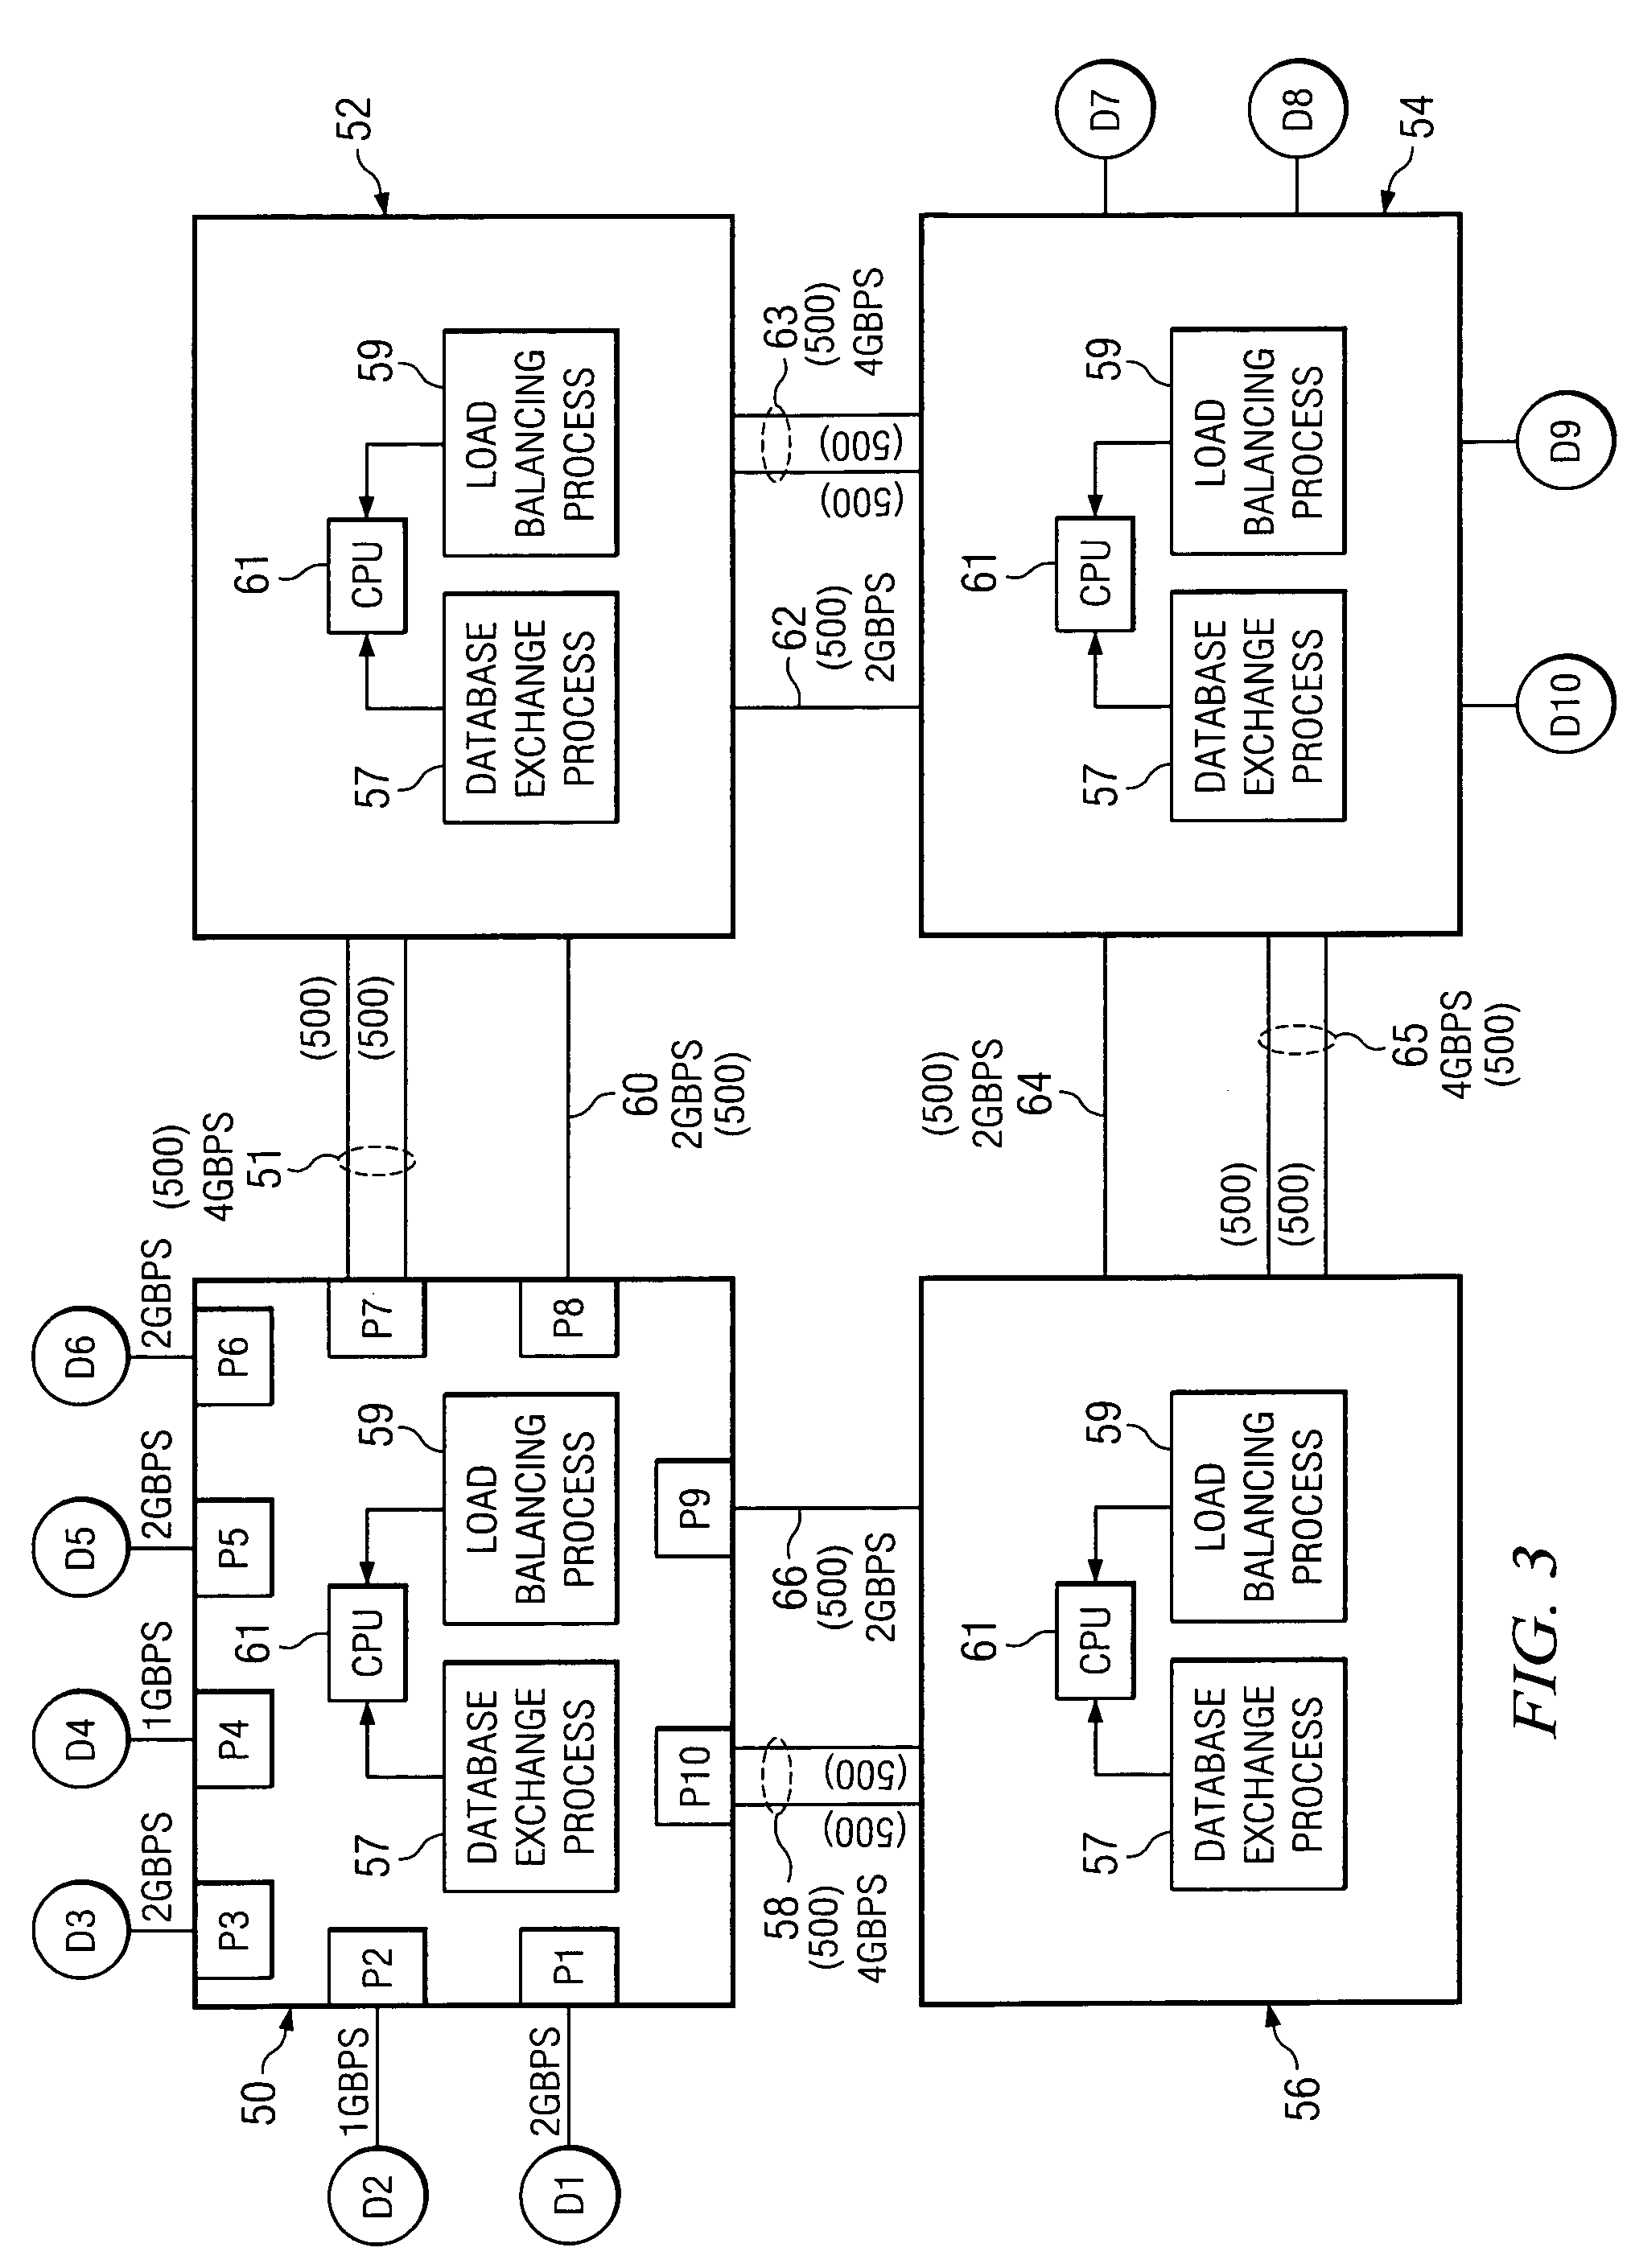 Load balancing in a network comprising communication paths having different bandwidths